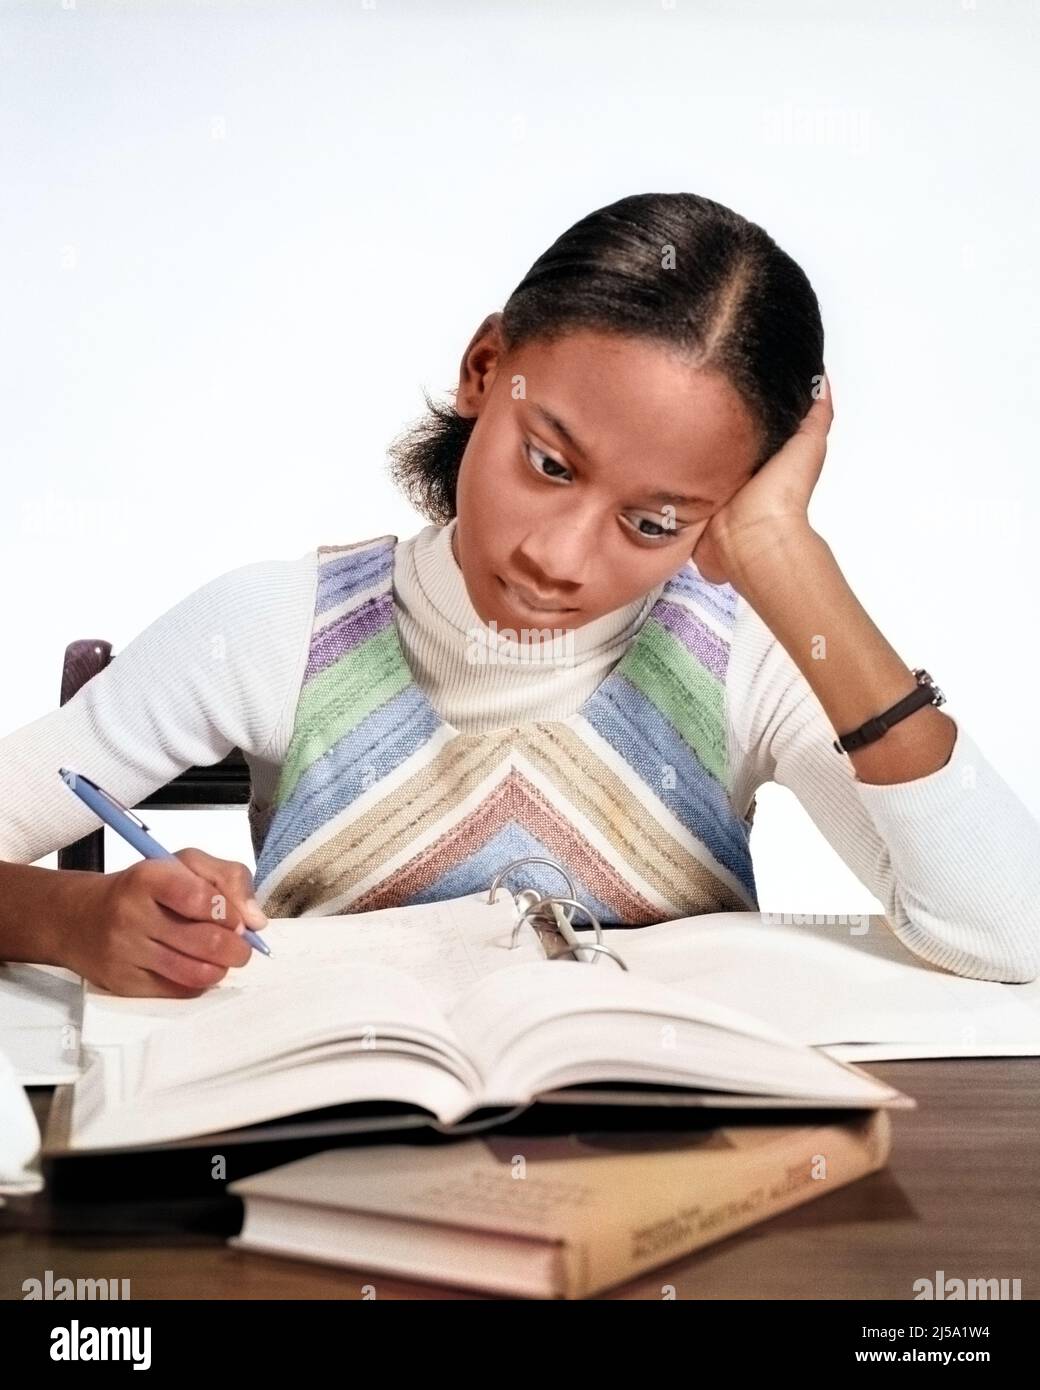 1970s AFRICAN-AMERICAN TEEN GIRL STUDYING MAKING NOTES OPEN BOOK AND NOTEBOOK DOING HOMEWORK - s20840c HAR001 HARS LIFESTYLE SATISFACTION FEMALES HOME LIFE COPY SPACE PERSONS DOING CARING TEENAGE GIRL GOALS HEAD AND SHOULDERS AFRICAN-AMERICANS AFRICAN-AMERICAN AND KNOWLEDGE BLACK ETHNICITY OPPORTUNITY CONCEPTUAL TEENAGED COOPERATION FOCUSED JUVENILES MIDDLE SCHOOL PRE-TEEN PRE-TEEN GIRL CONCENTRATING HAR001 OLD FASHIONED AFRICAN AMERICANS Stock Photo